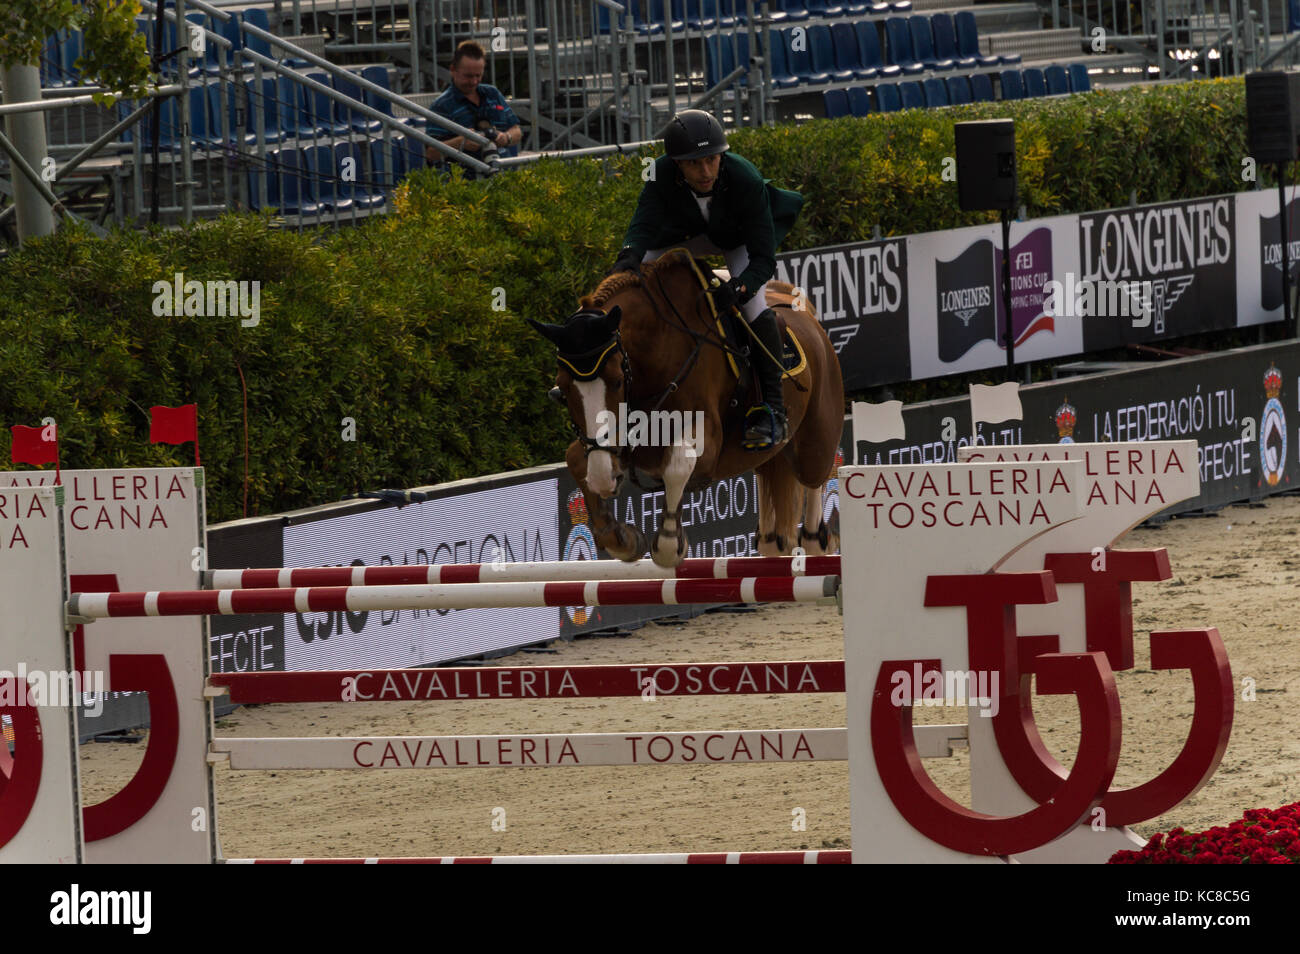 Coupe des nations FEI Longines jumping final, Barcelone Banque D'Images